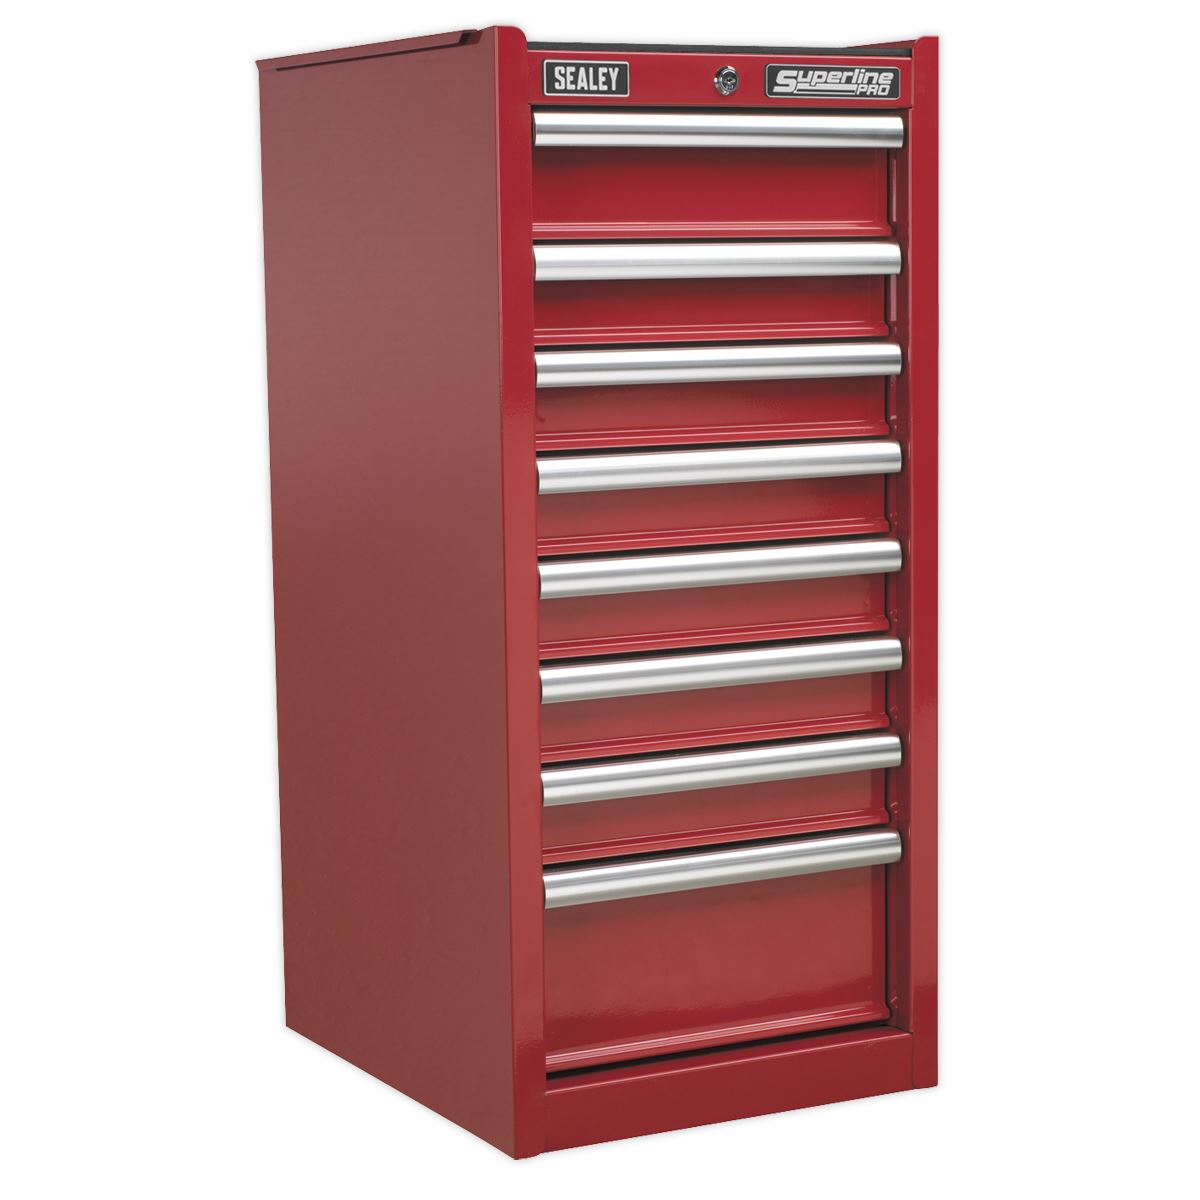 Sealey Hang-On Chest 8 Drawer with Ball Bearing Slides - Red AP33589